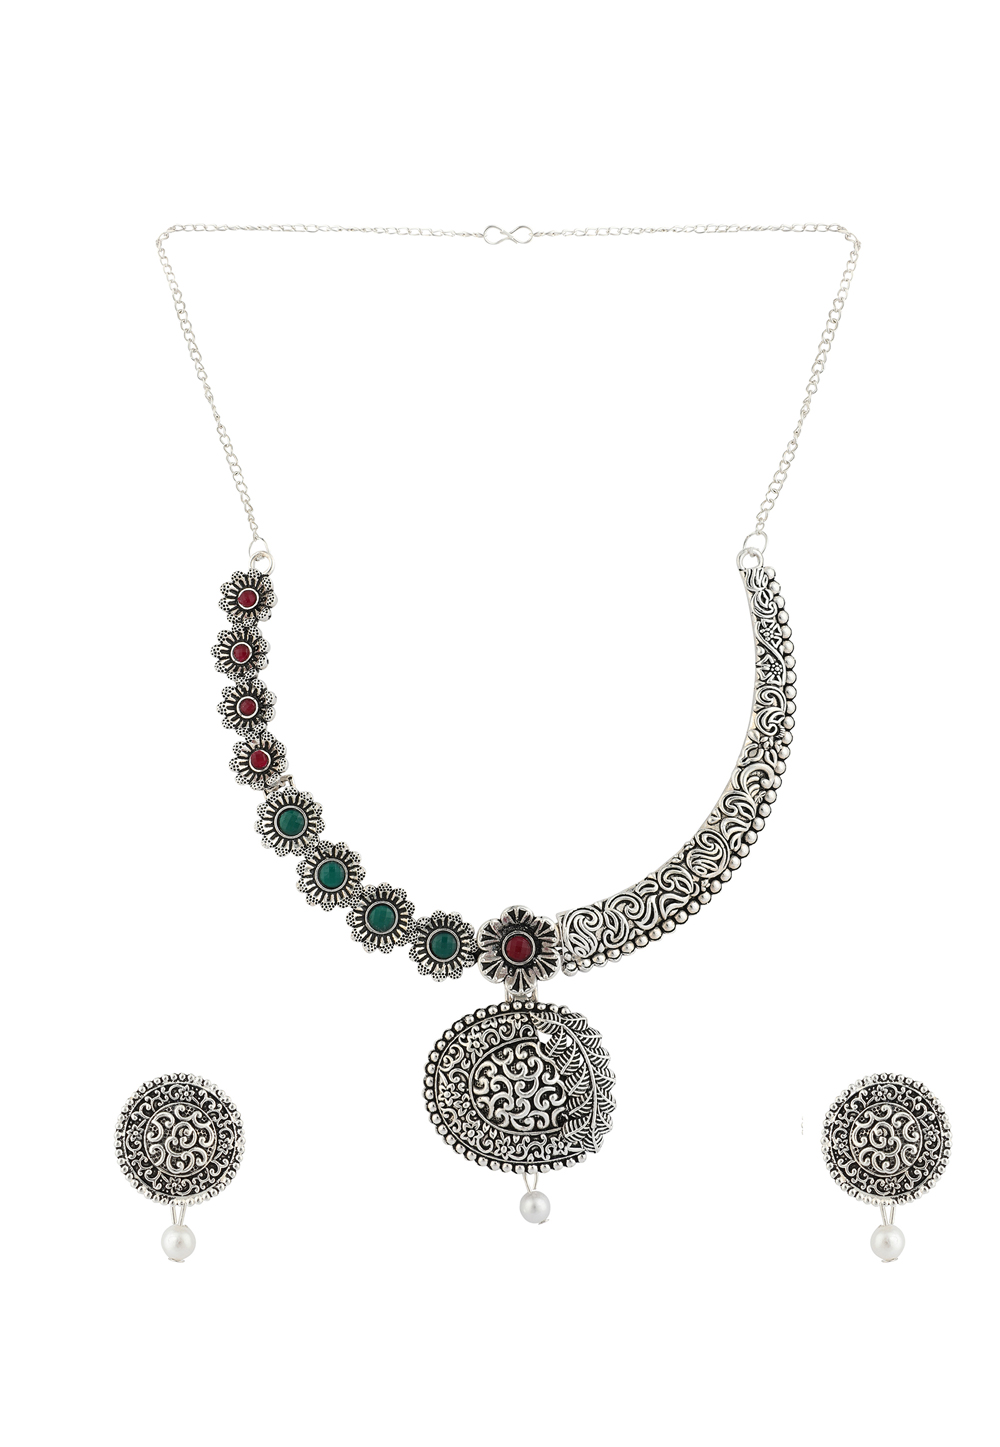 Green Alloy Necklace Set With Earrings 224635